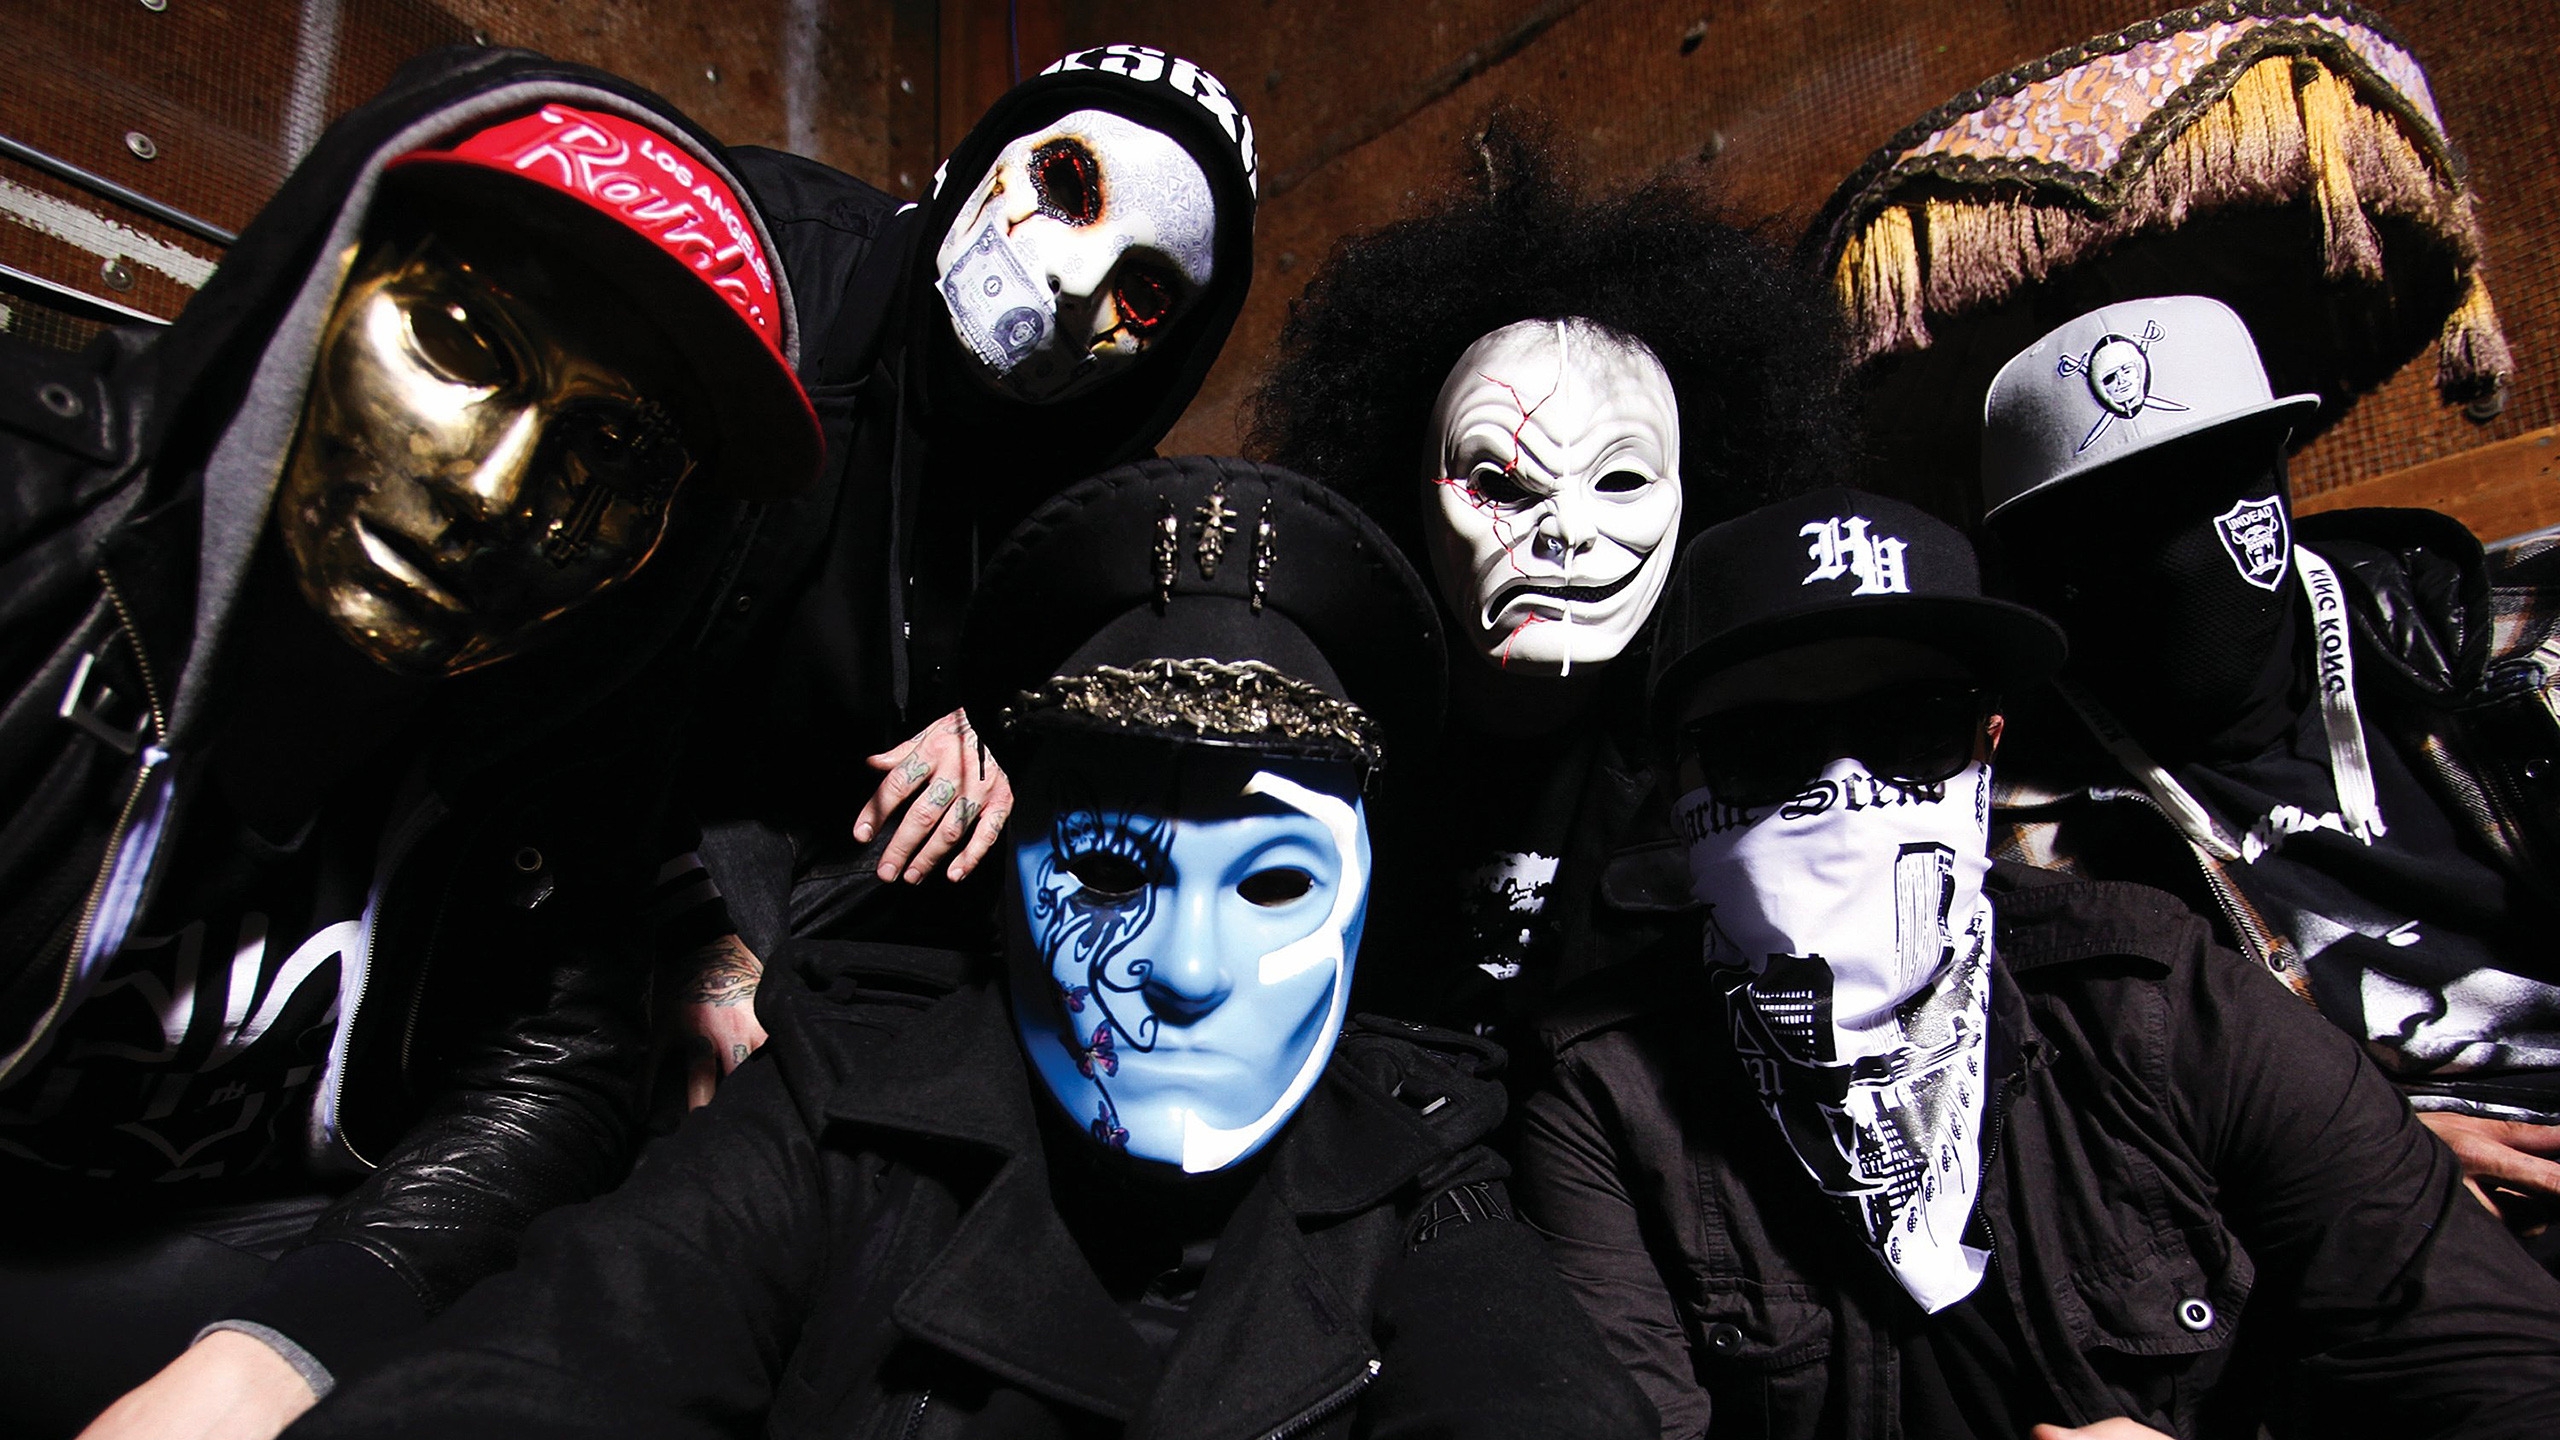 Hollywood Undead for 2560x1440 HDTV resolution